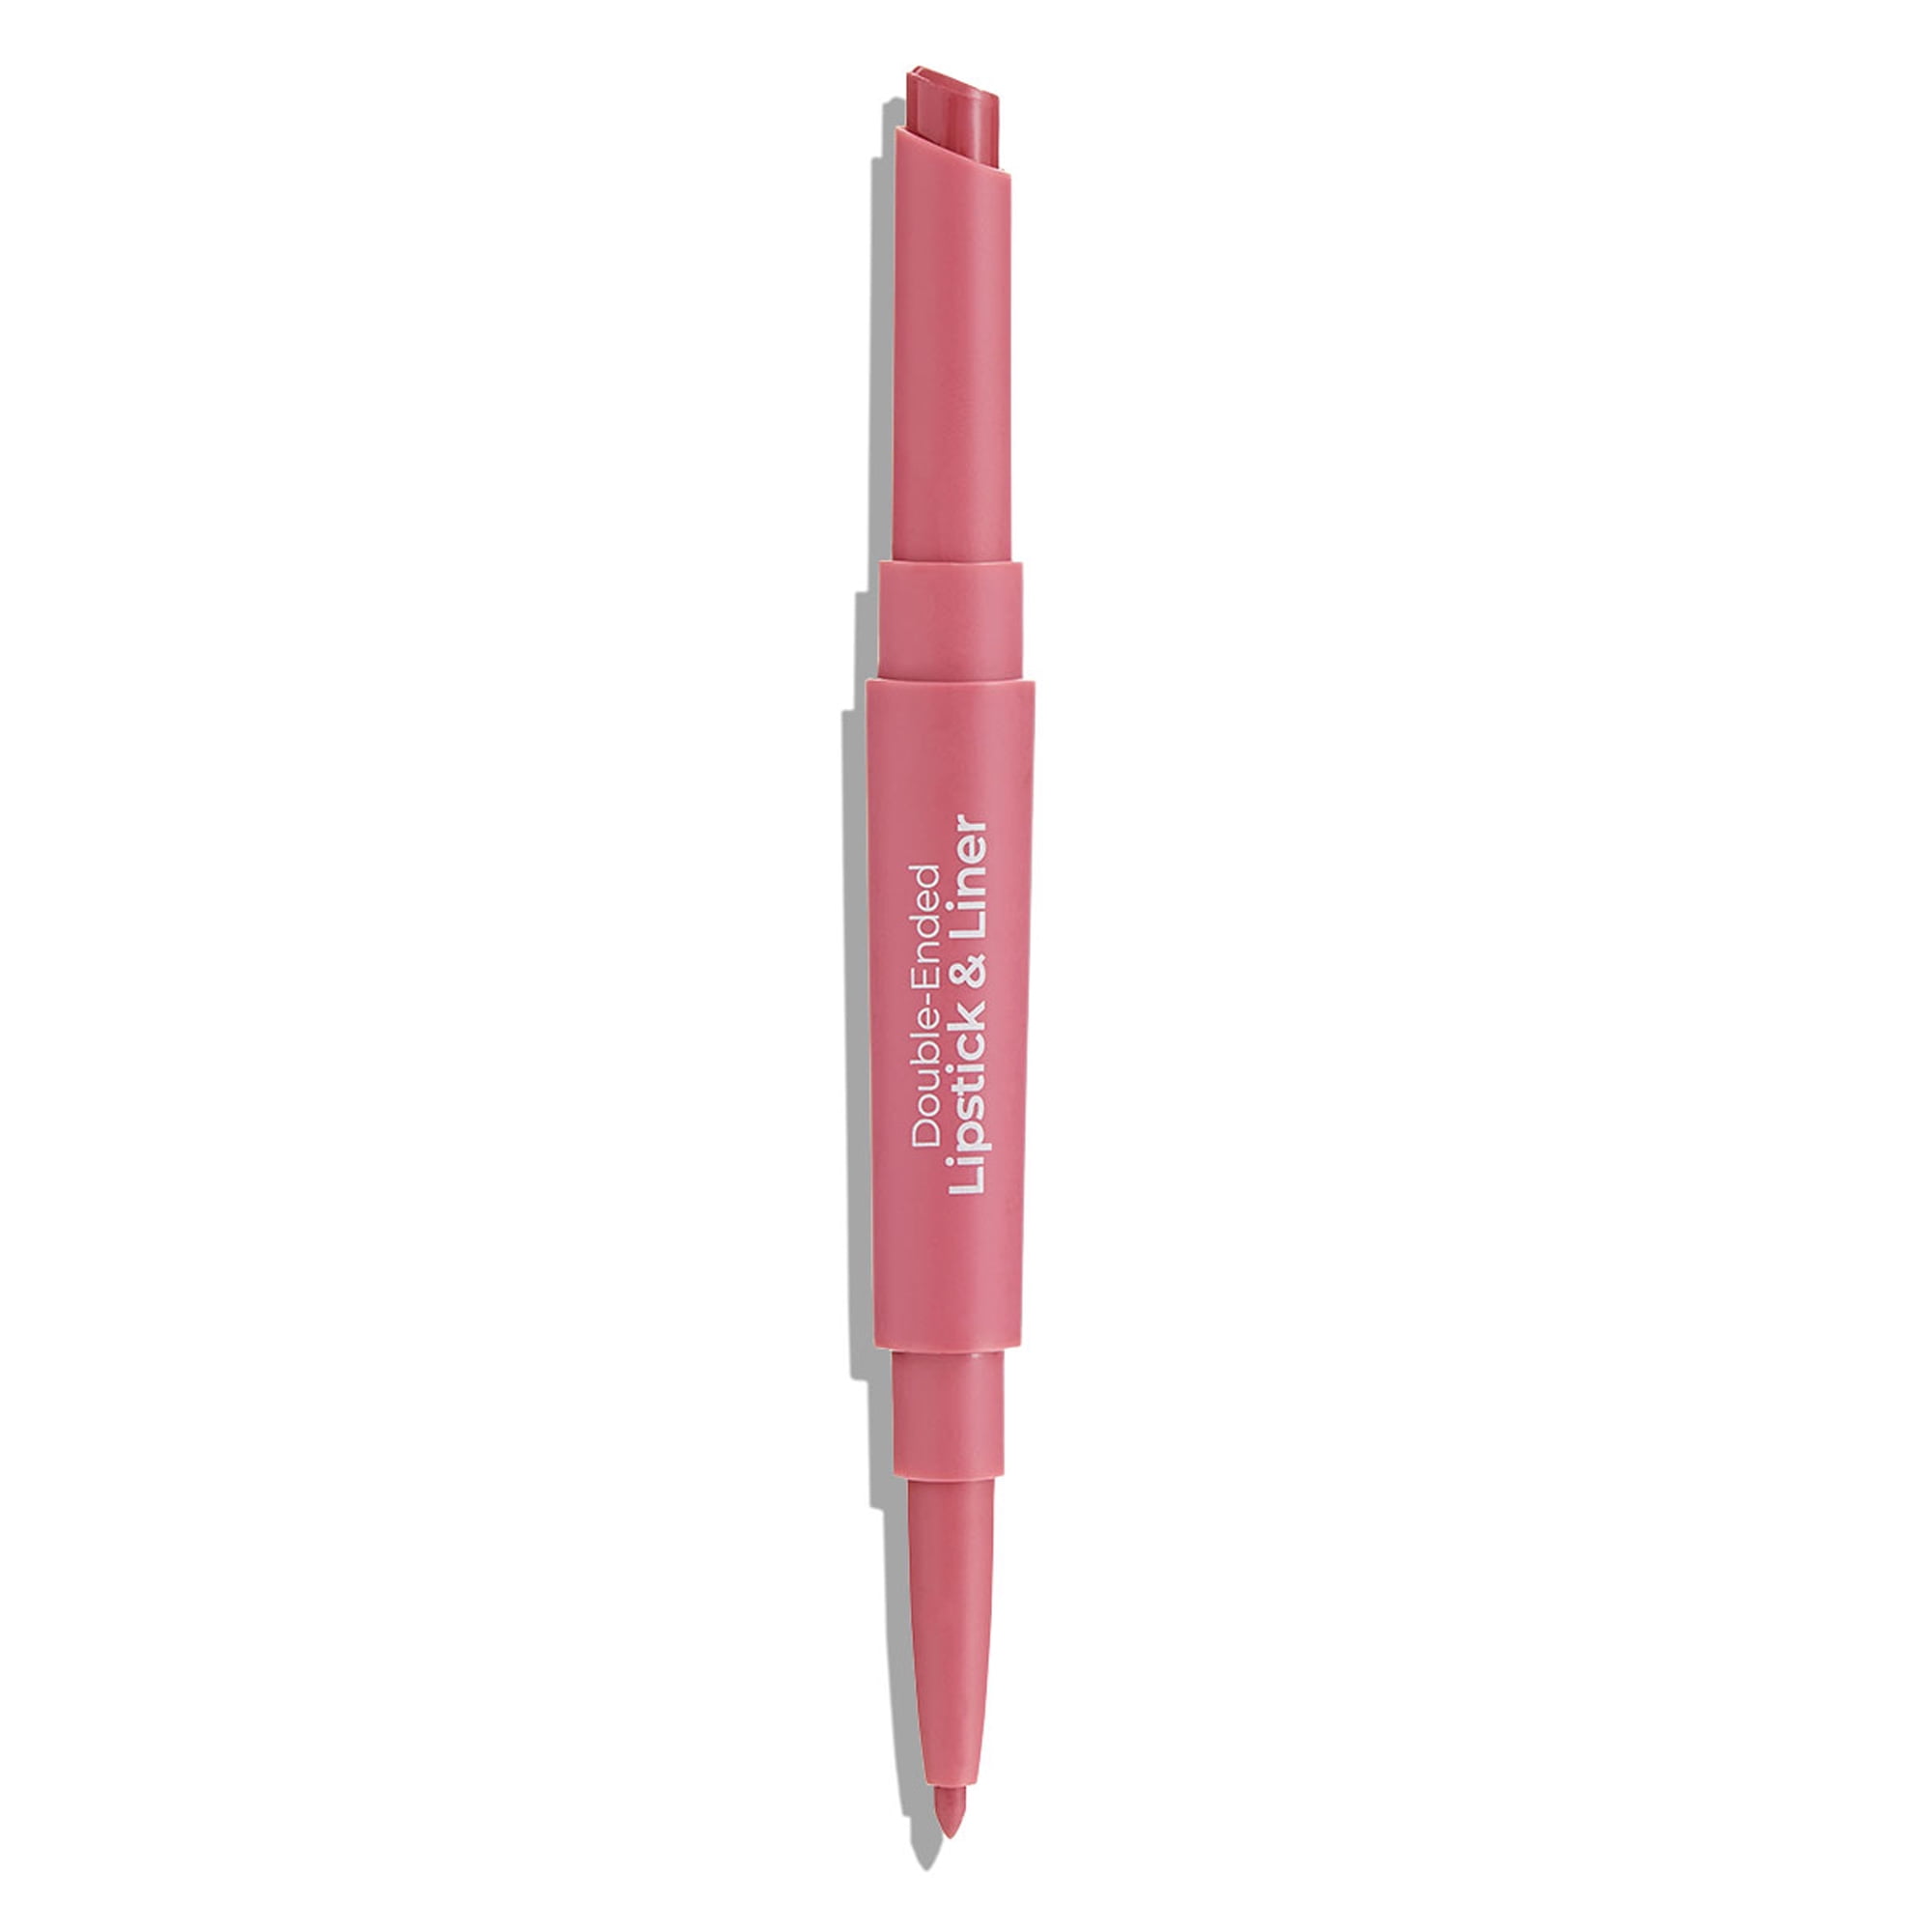 MCoBeauty Double-Ended Lipstick and Liner - Nude Mauve, 0.02 oz ...